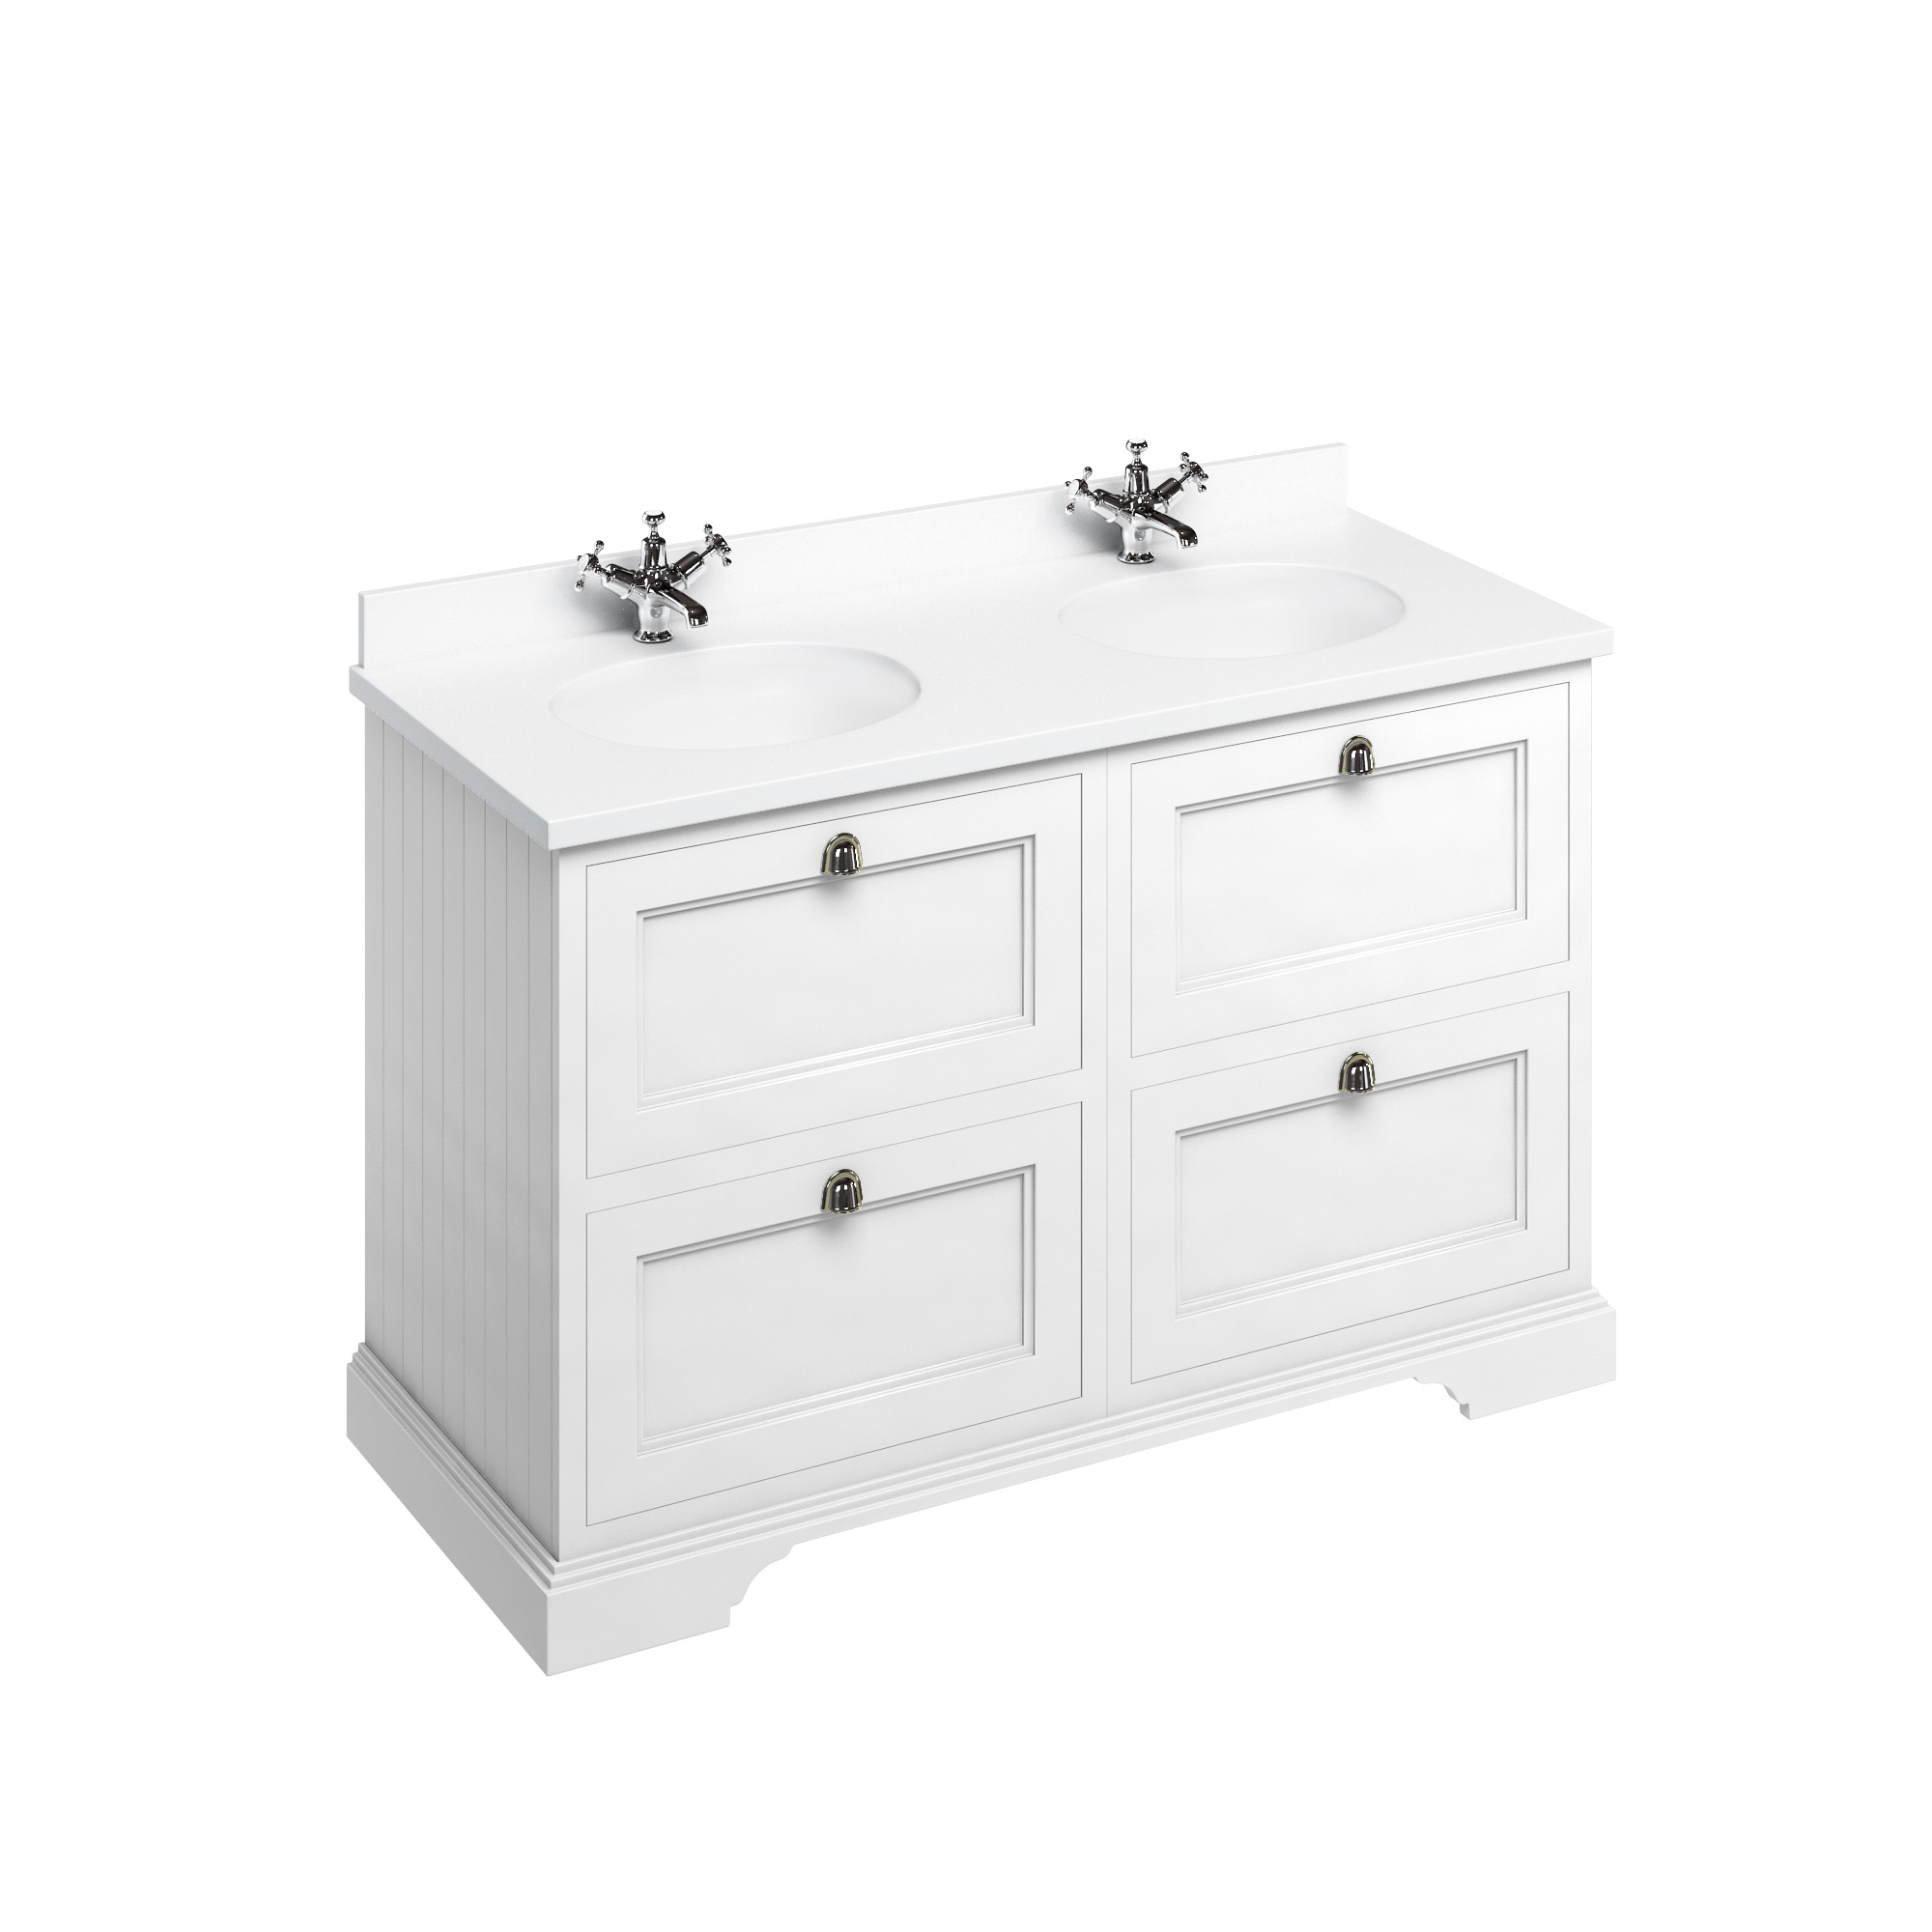 Freestanding 130 Vanity Unit with drawers - Matt White and Minerva white worktop with two integrated white basins